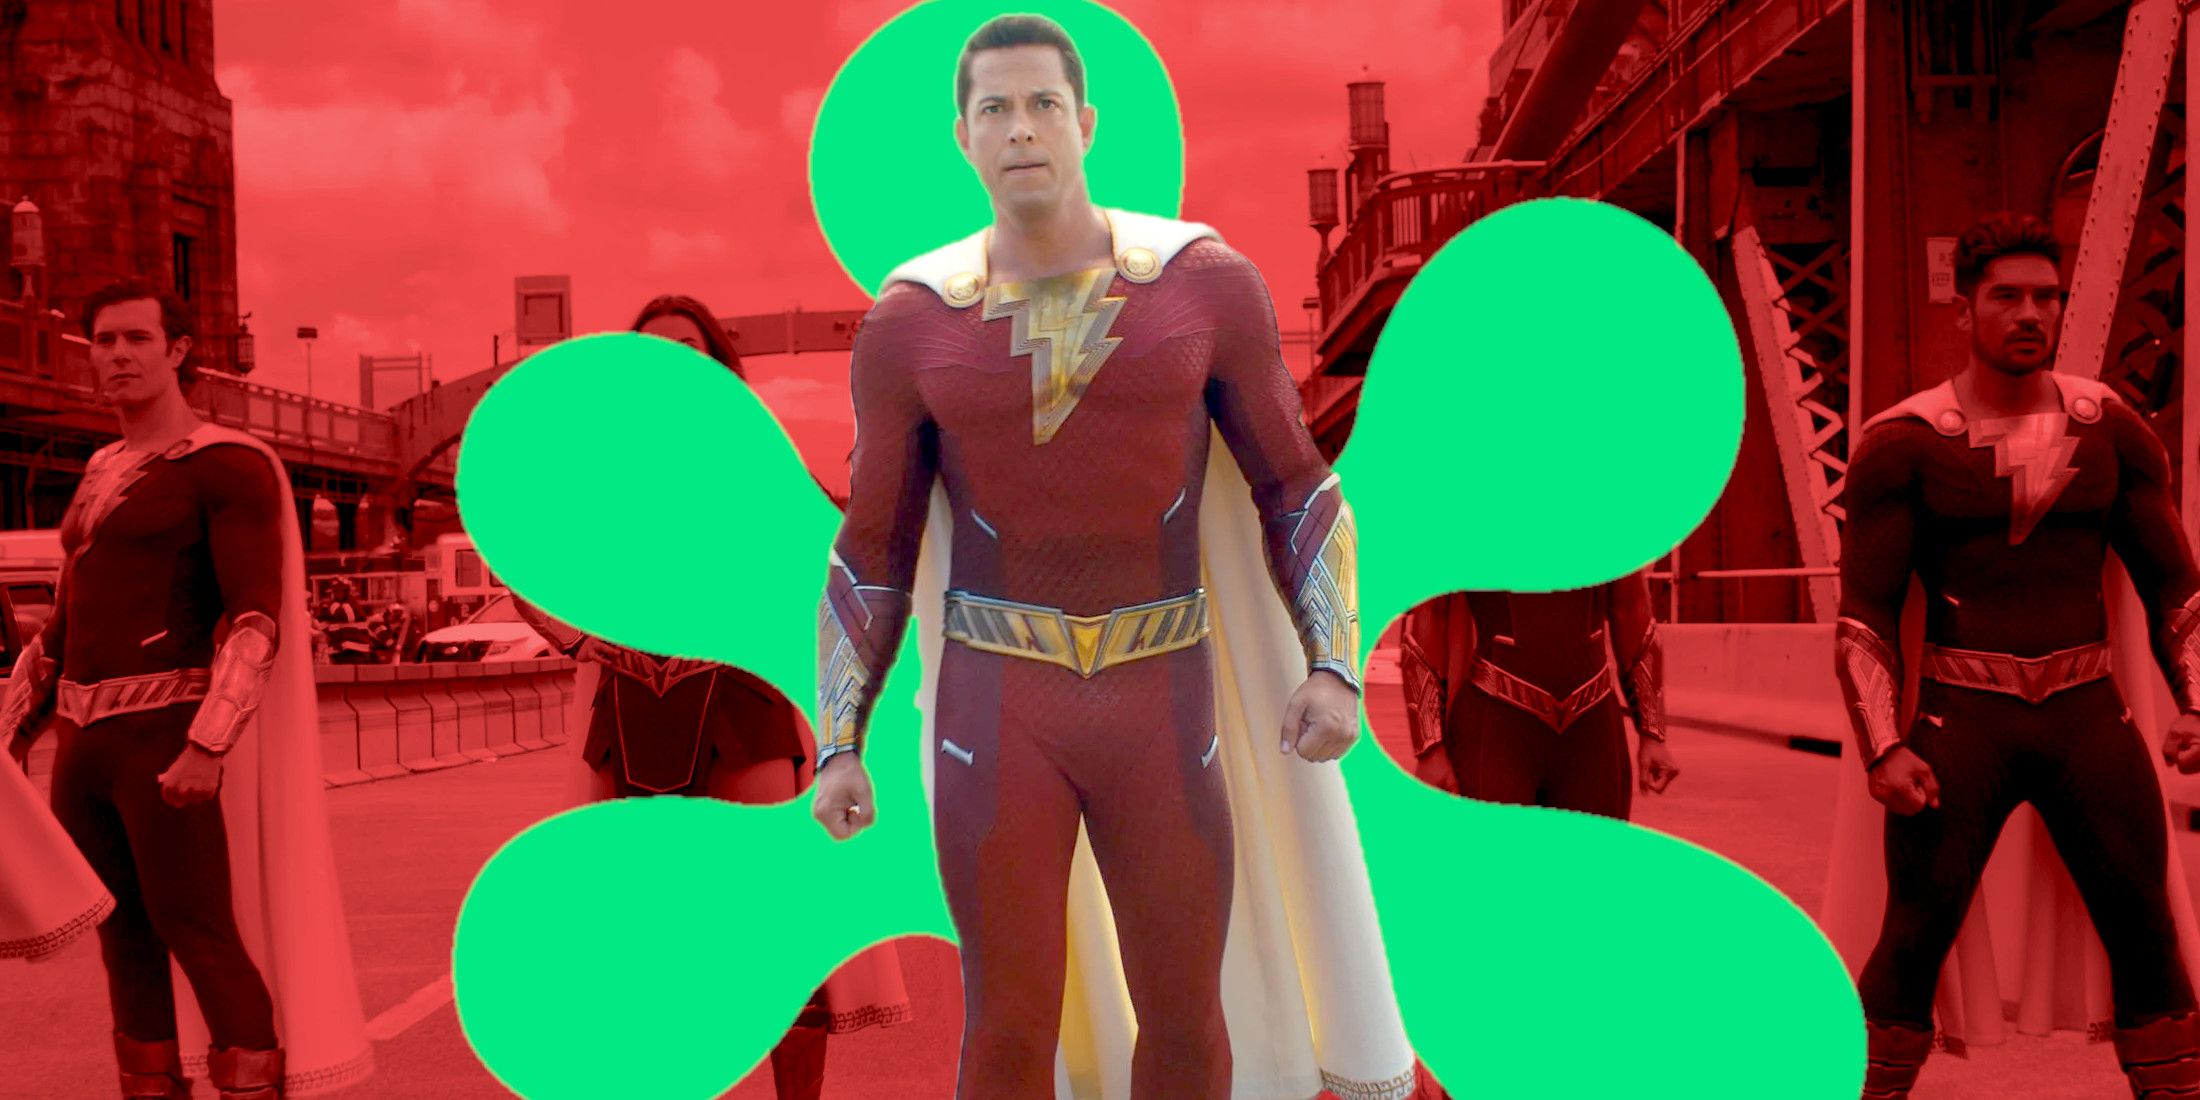 SHAZAM!2 ratings in free-fall plunge - Gen. Discussion - Comic Vine